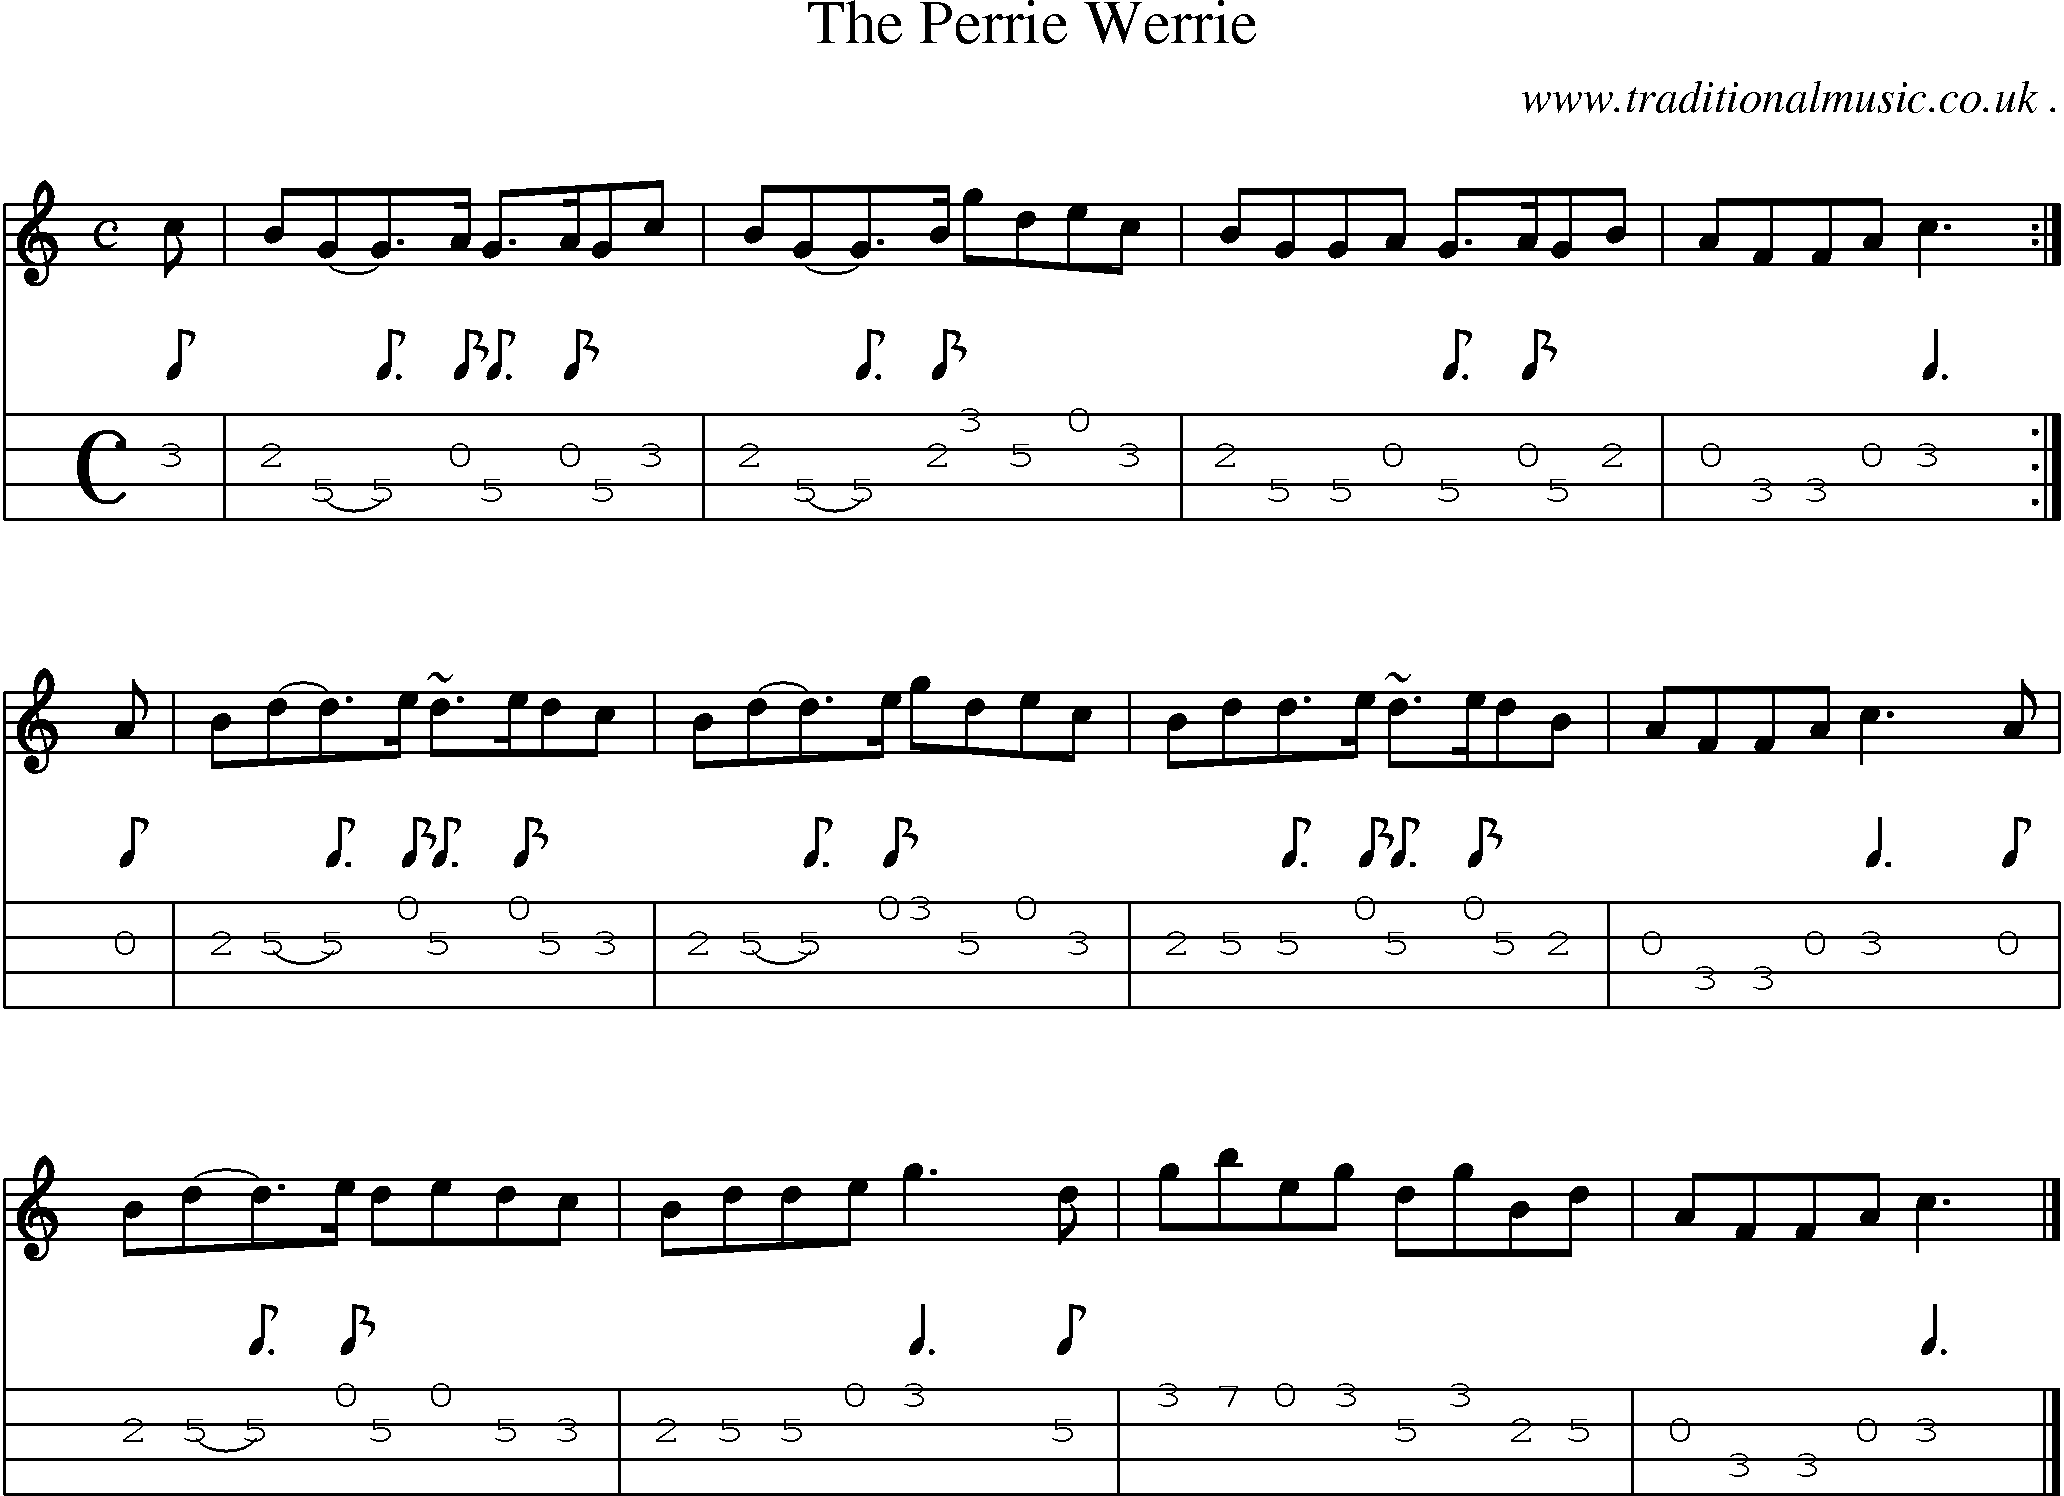 Sheet-music  score, Chords and Mandolin Tabs for The Perrie Werrie